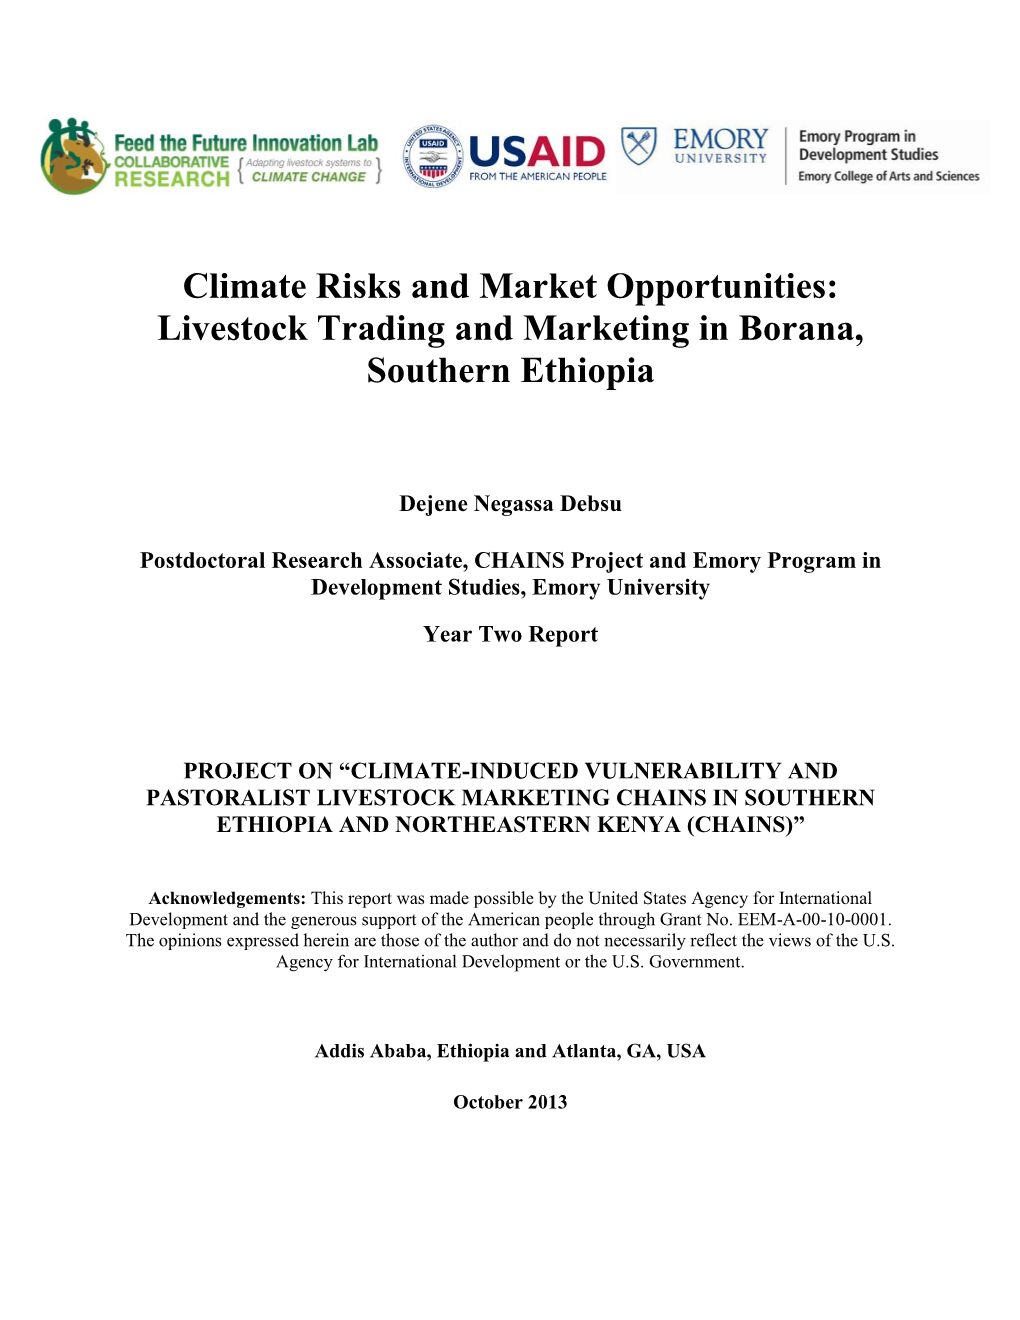 Climate Risks and Market Opportunities: Livestock Trading and Marketing in Borana, Southern Ethiopia